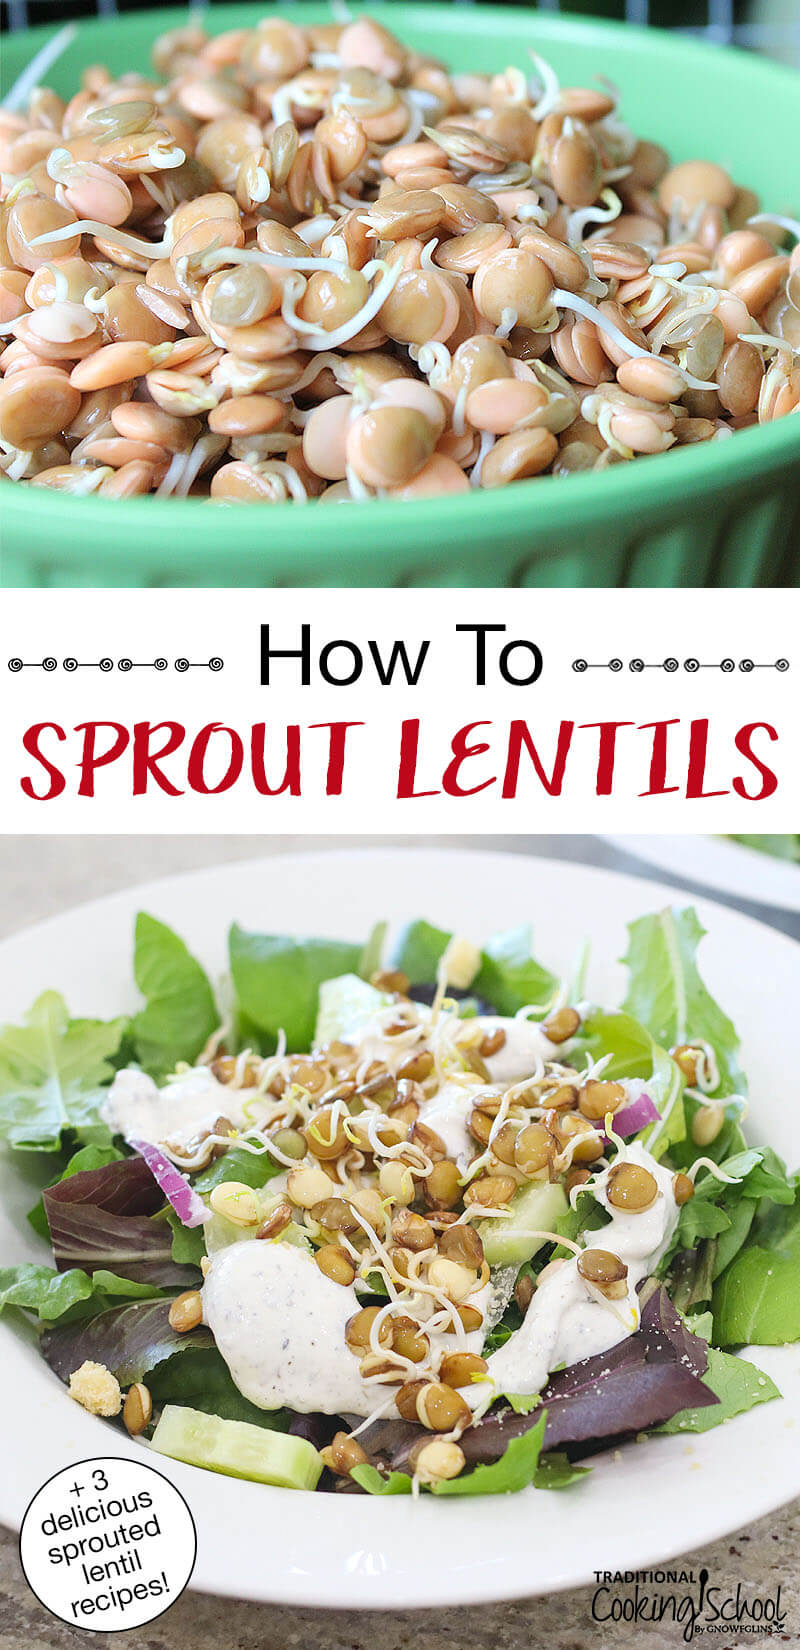 photo collage of sprouted lentils in a green bowl, and a fresh green salad topped with sprouted lentils. Text overlay says: "How To Sprout Lentils (+3 delicious sprouted lentil recipes!)"